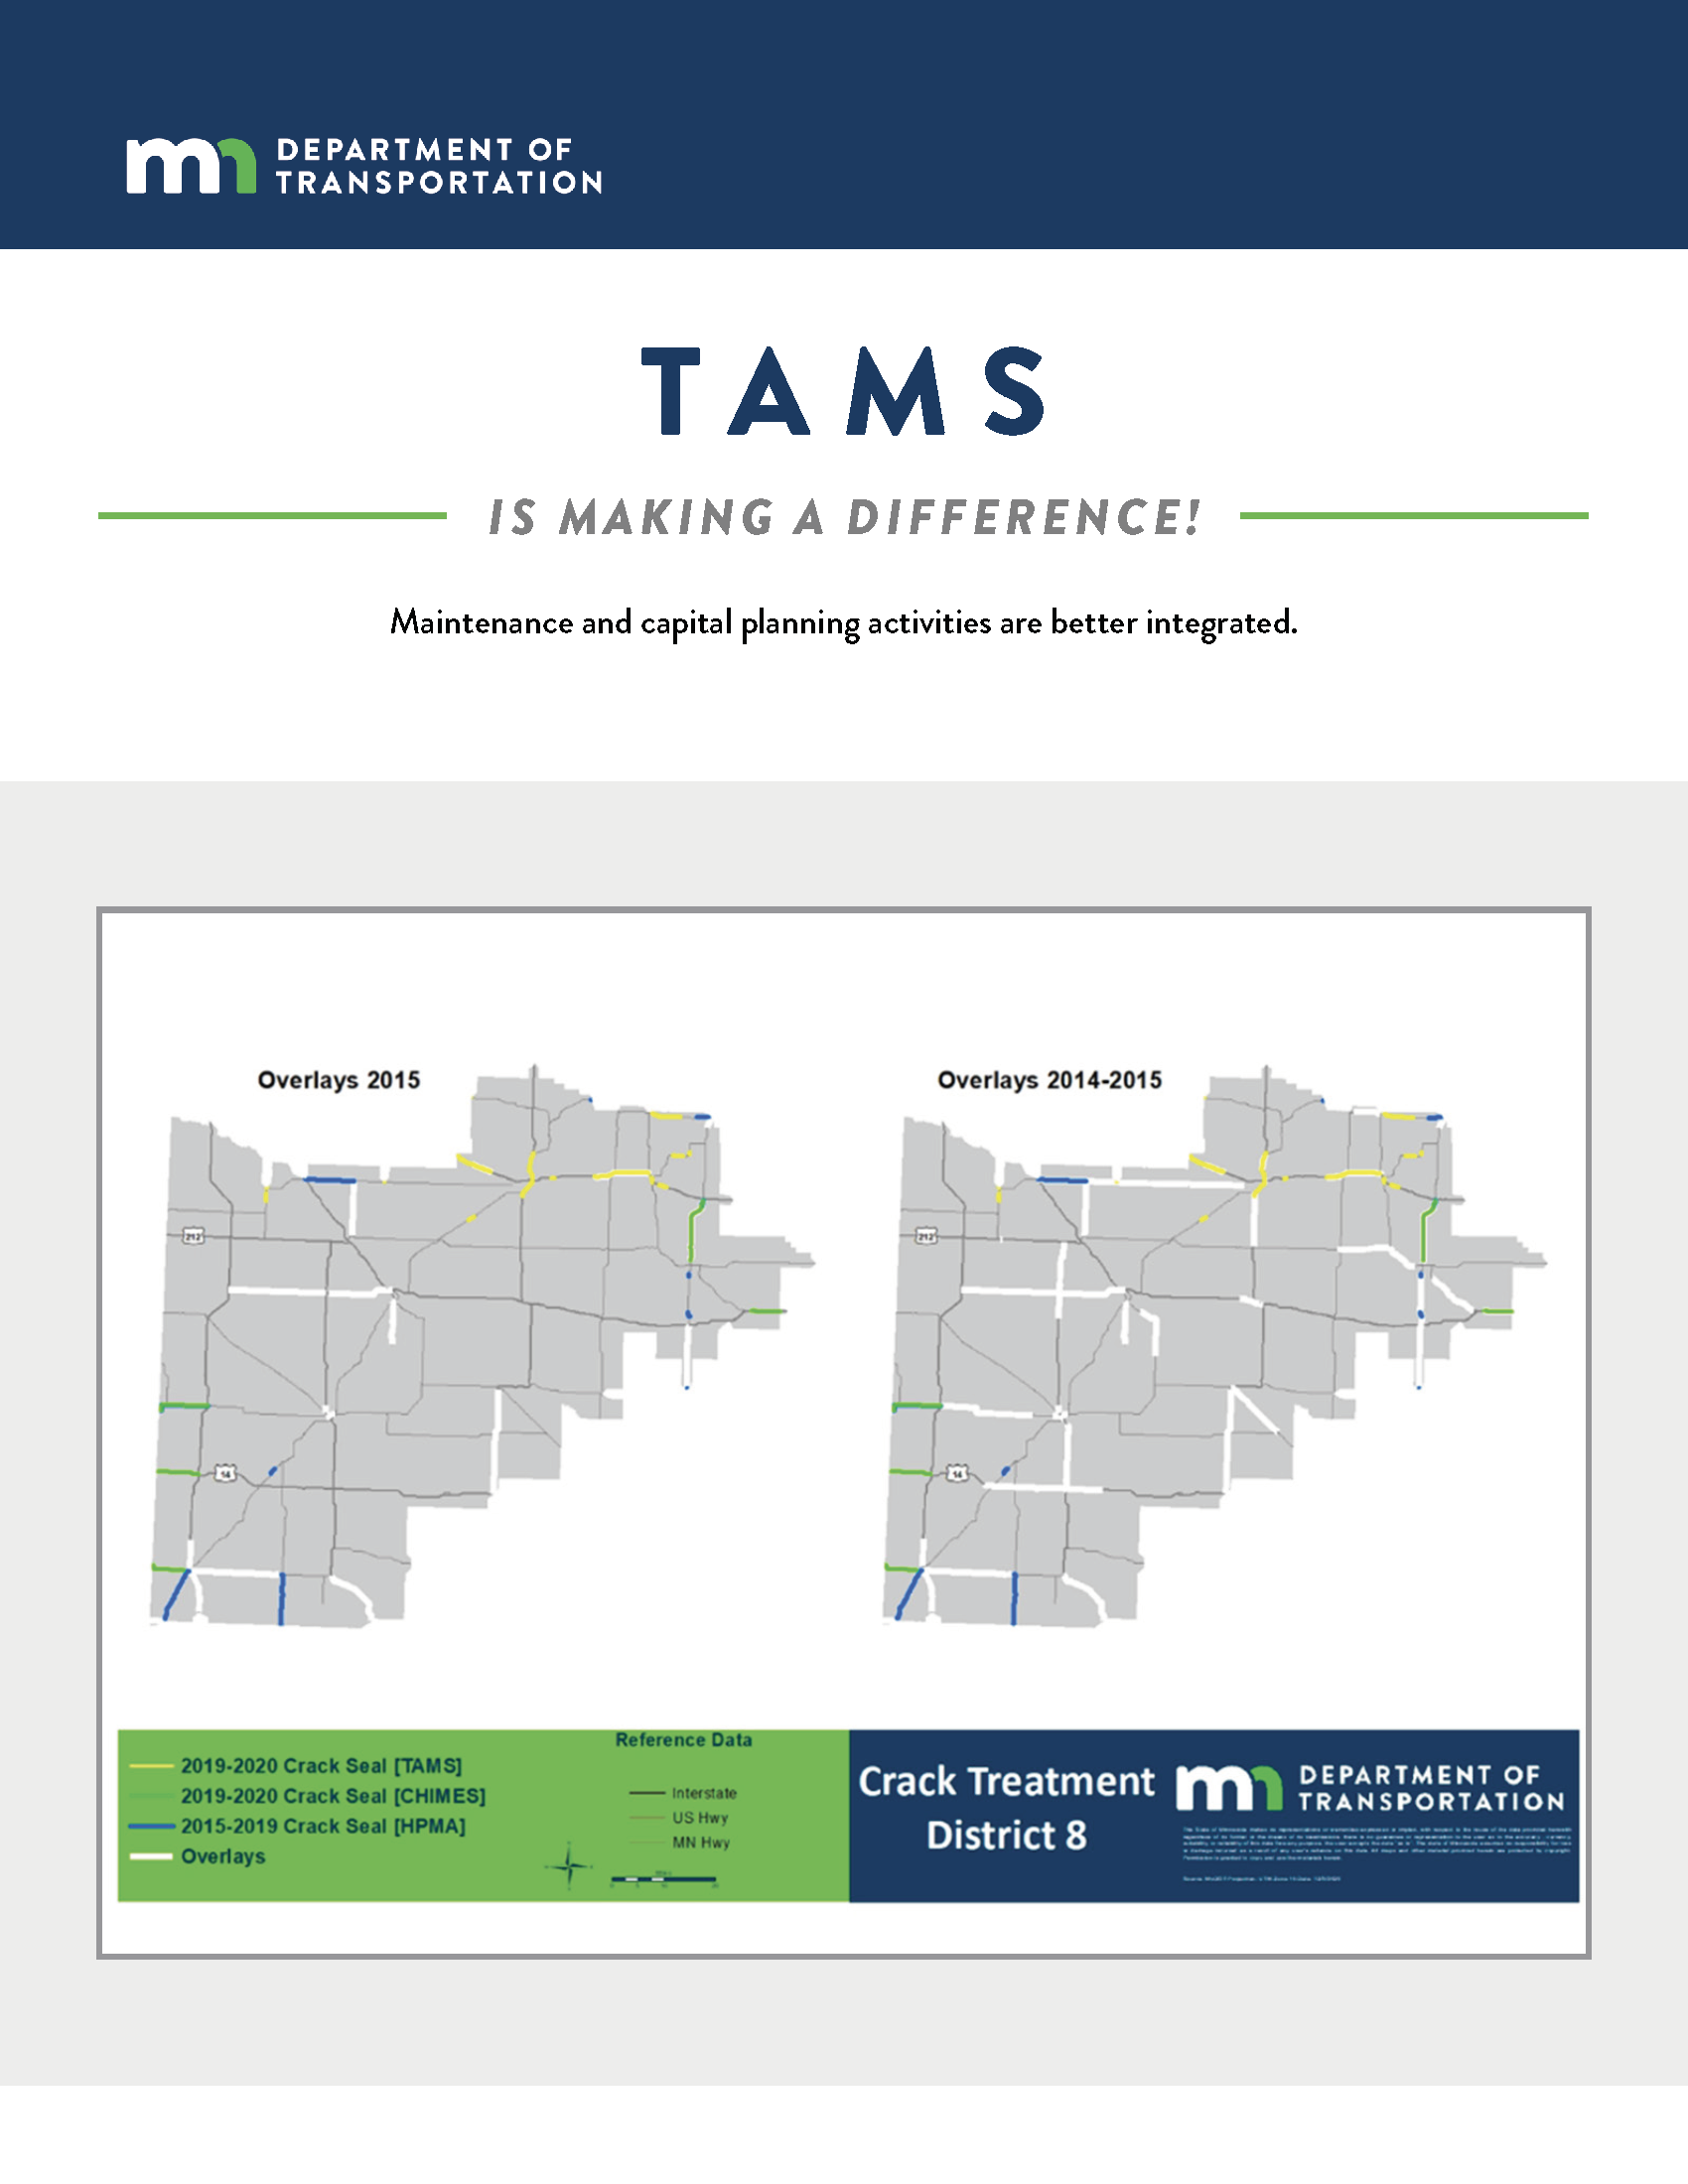 TAMS Difference - Integration (flyer)